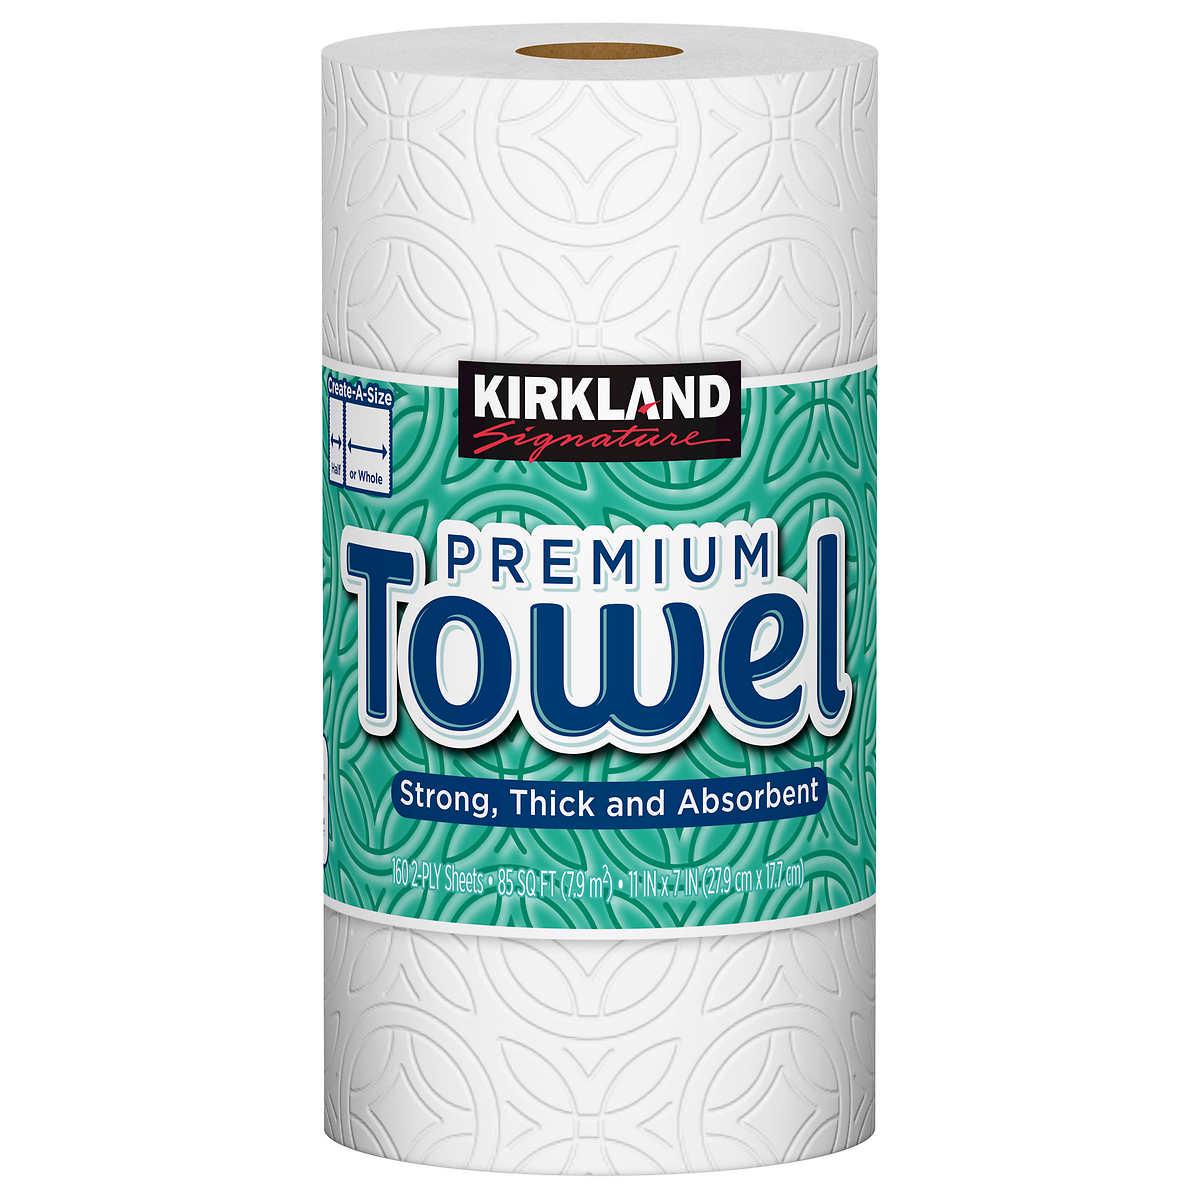 Kirkland Signature Paper Towels, 2-Ply, 160 Sheets, 12 Individually Wrapped Rolls